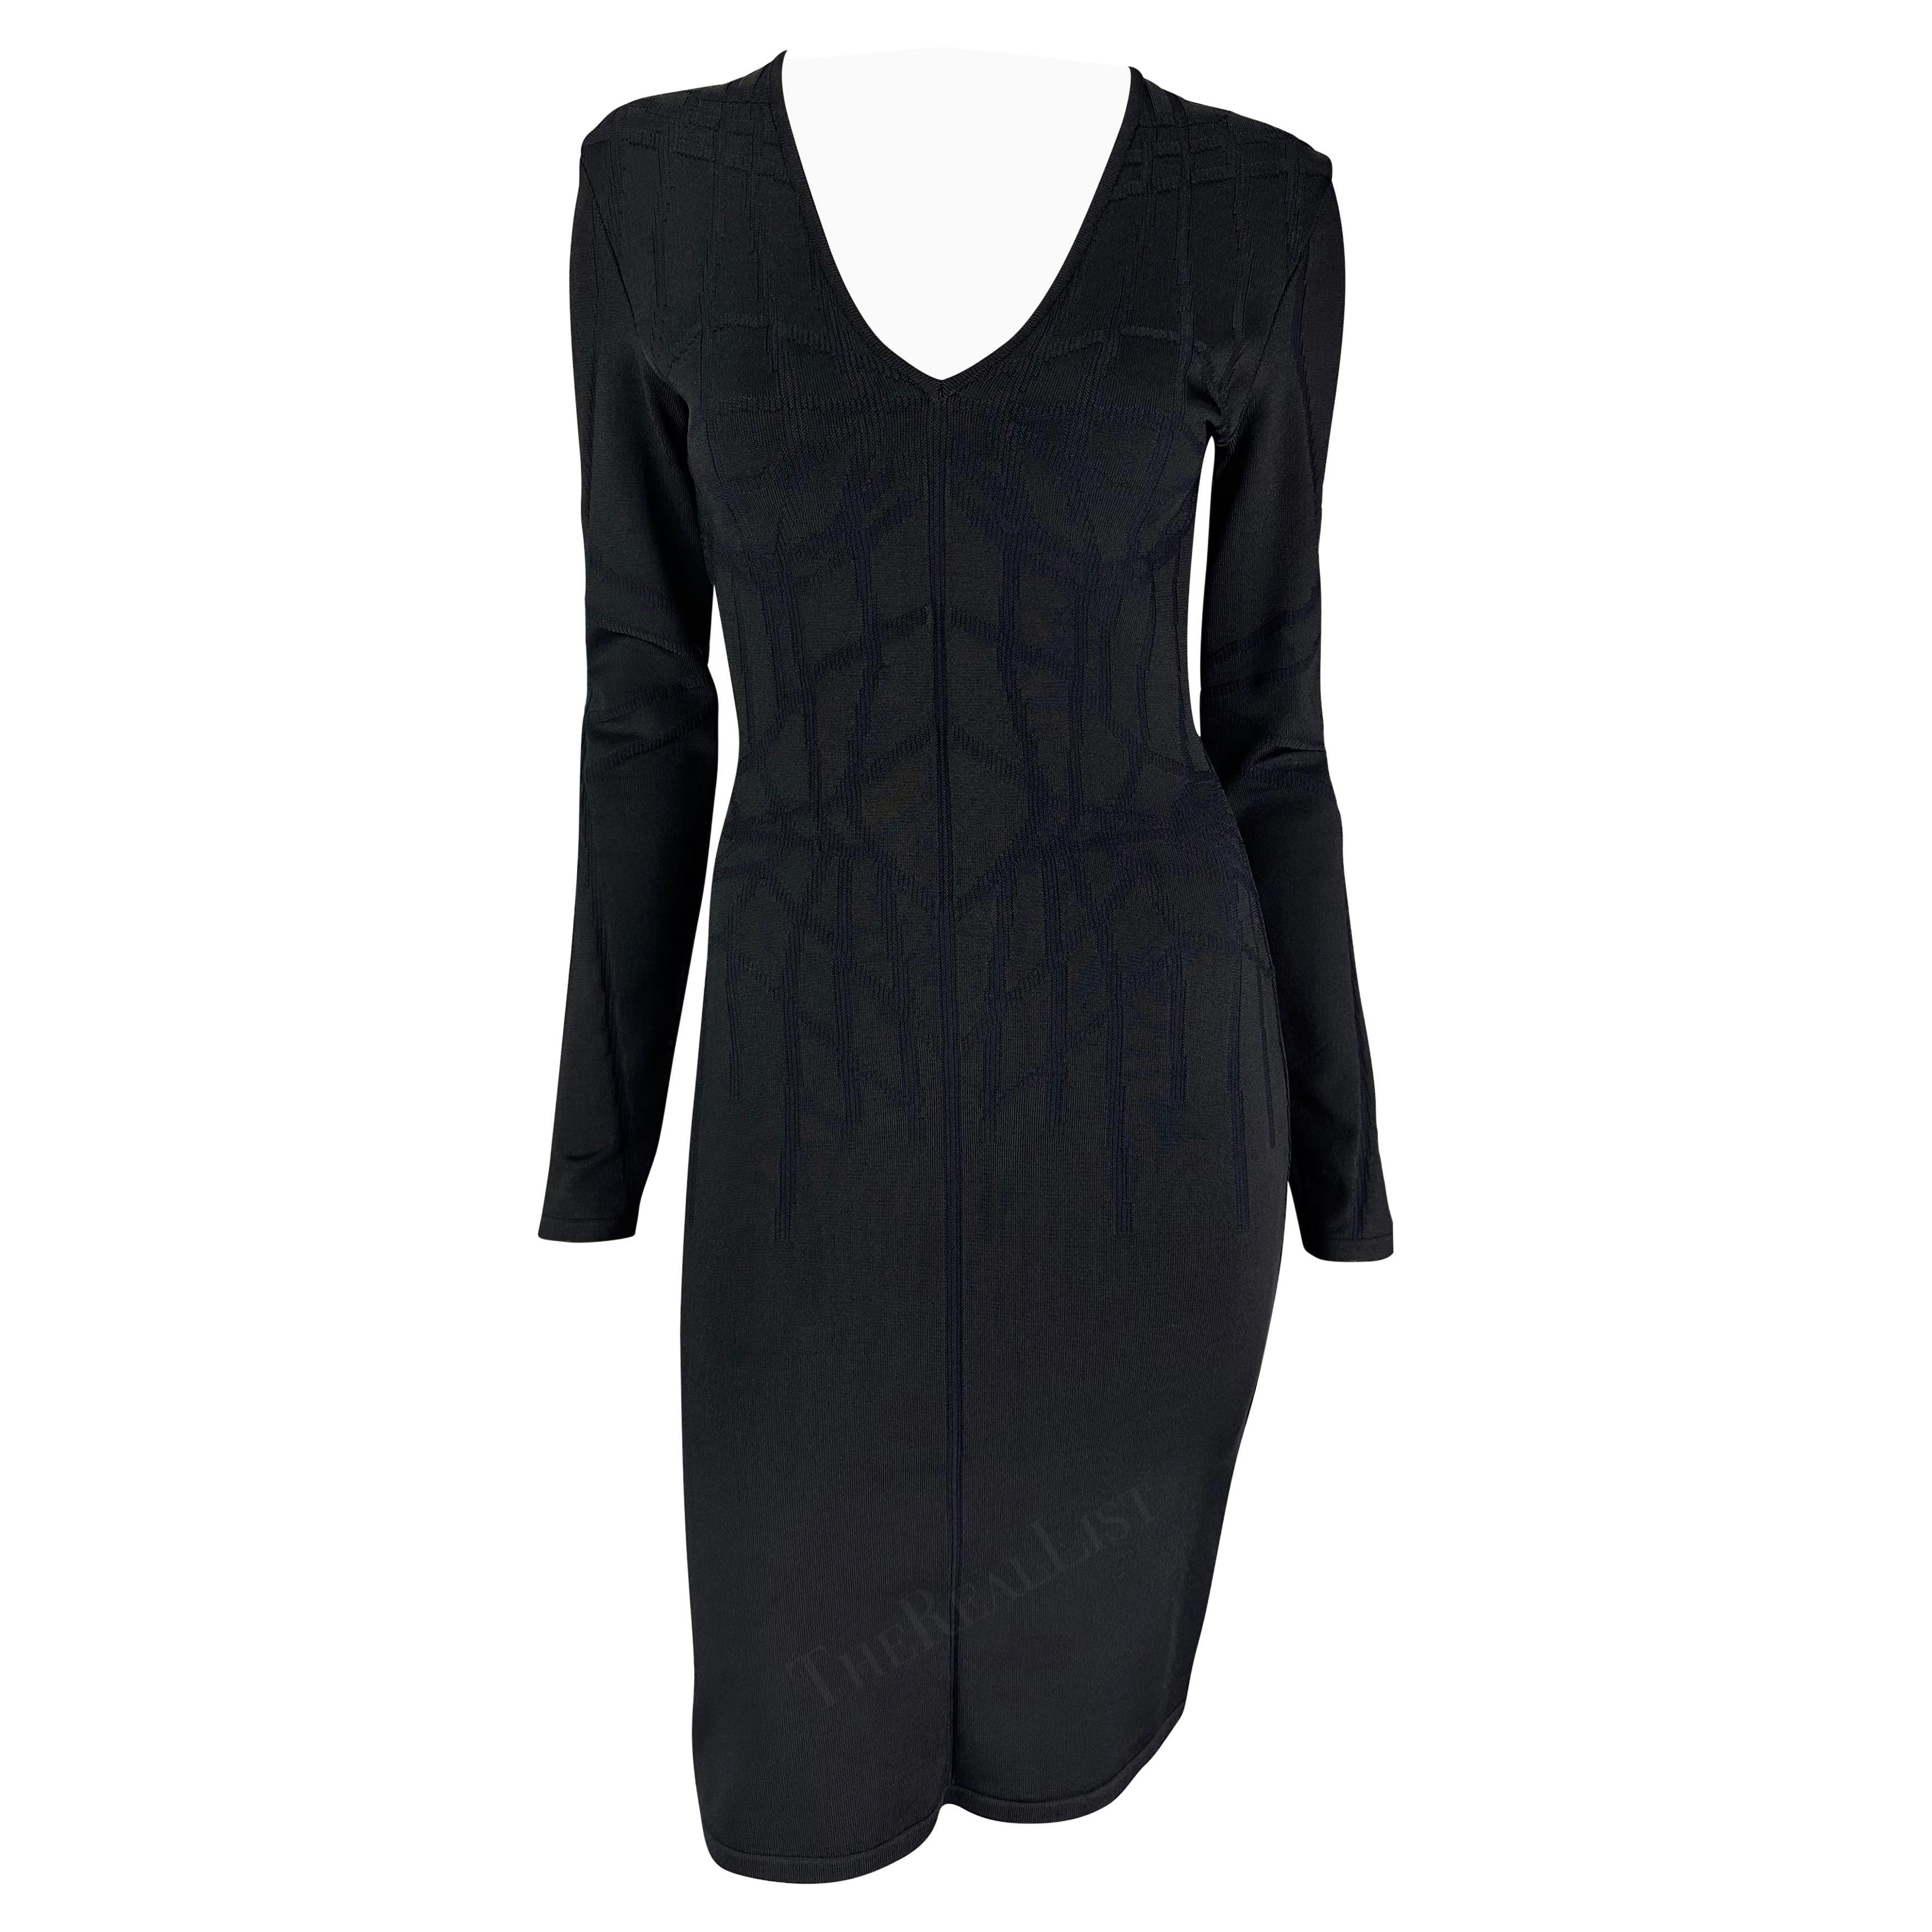 F/W 2001 Thierry Mugler Contour Outline Black Knit Bodycon Dress For Sale